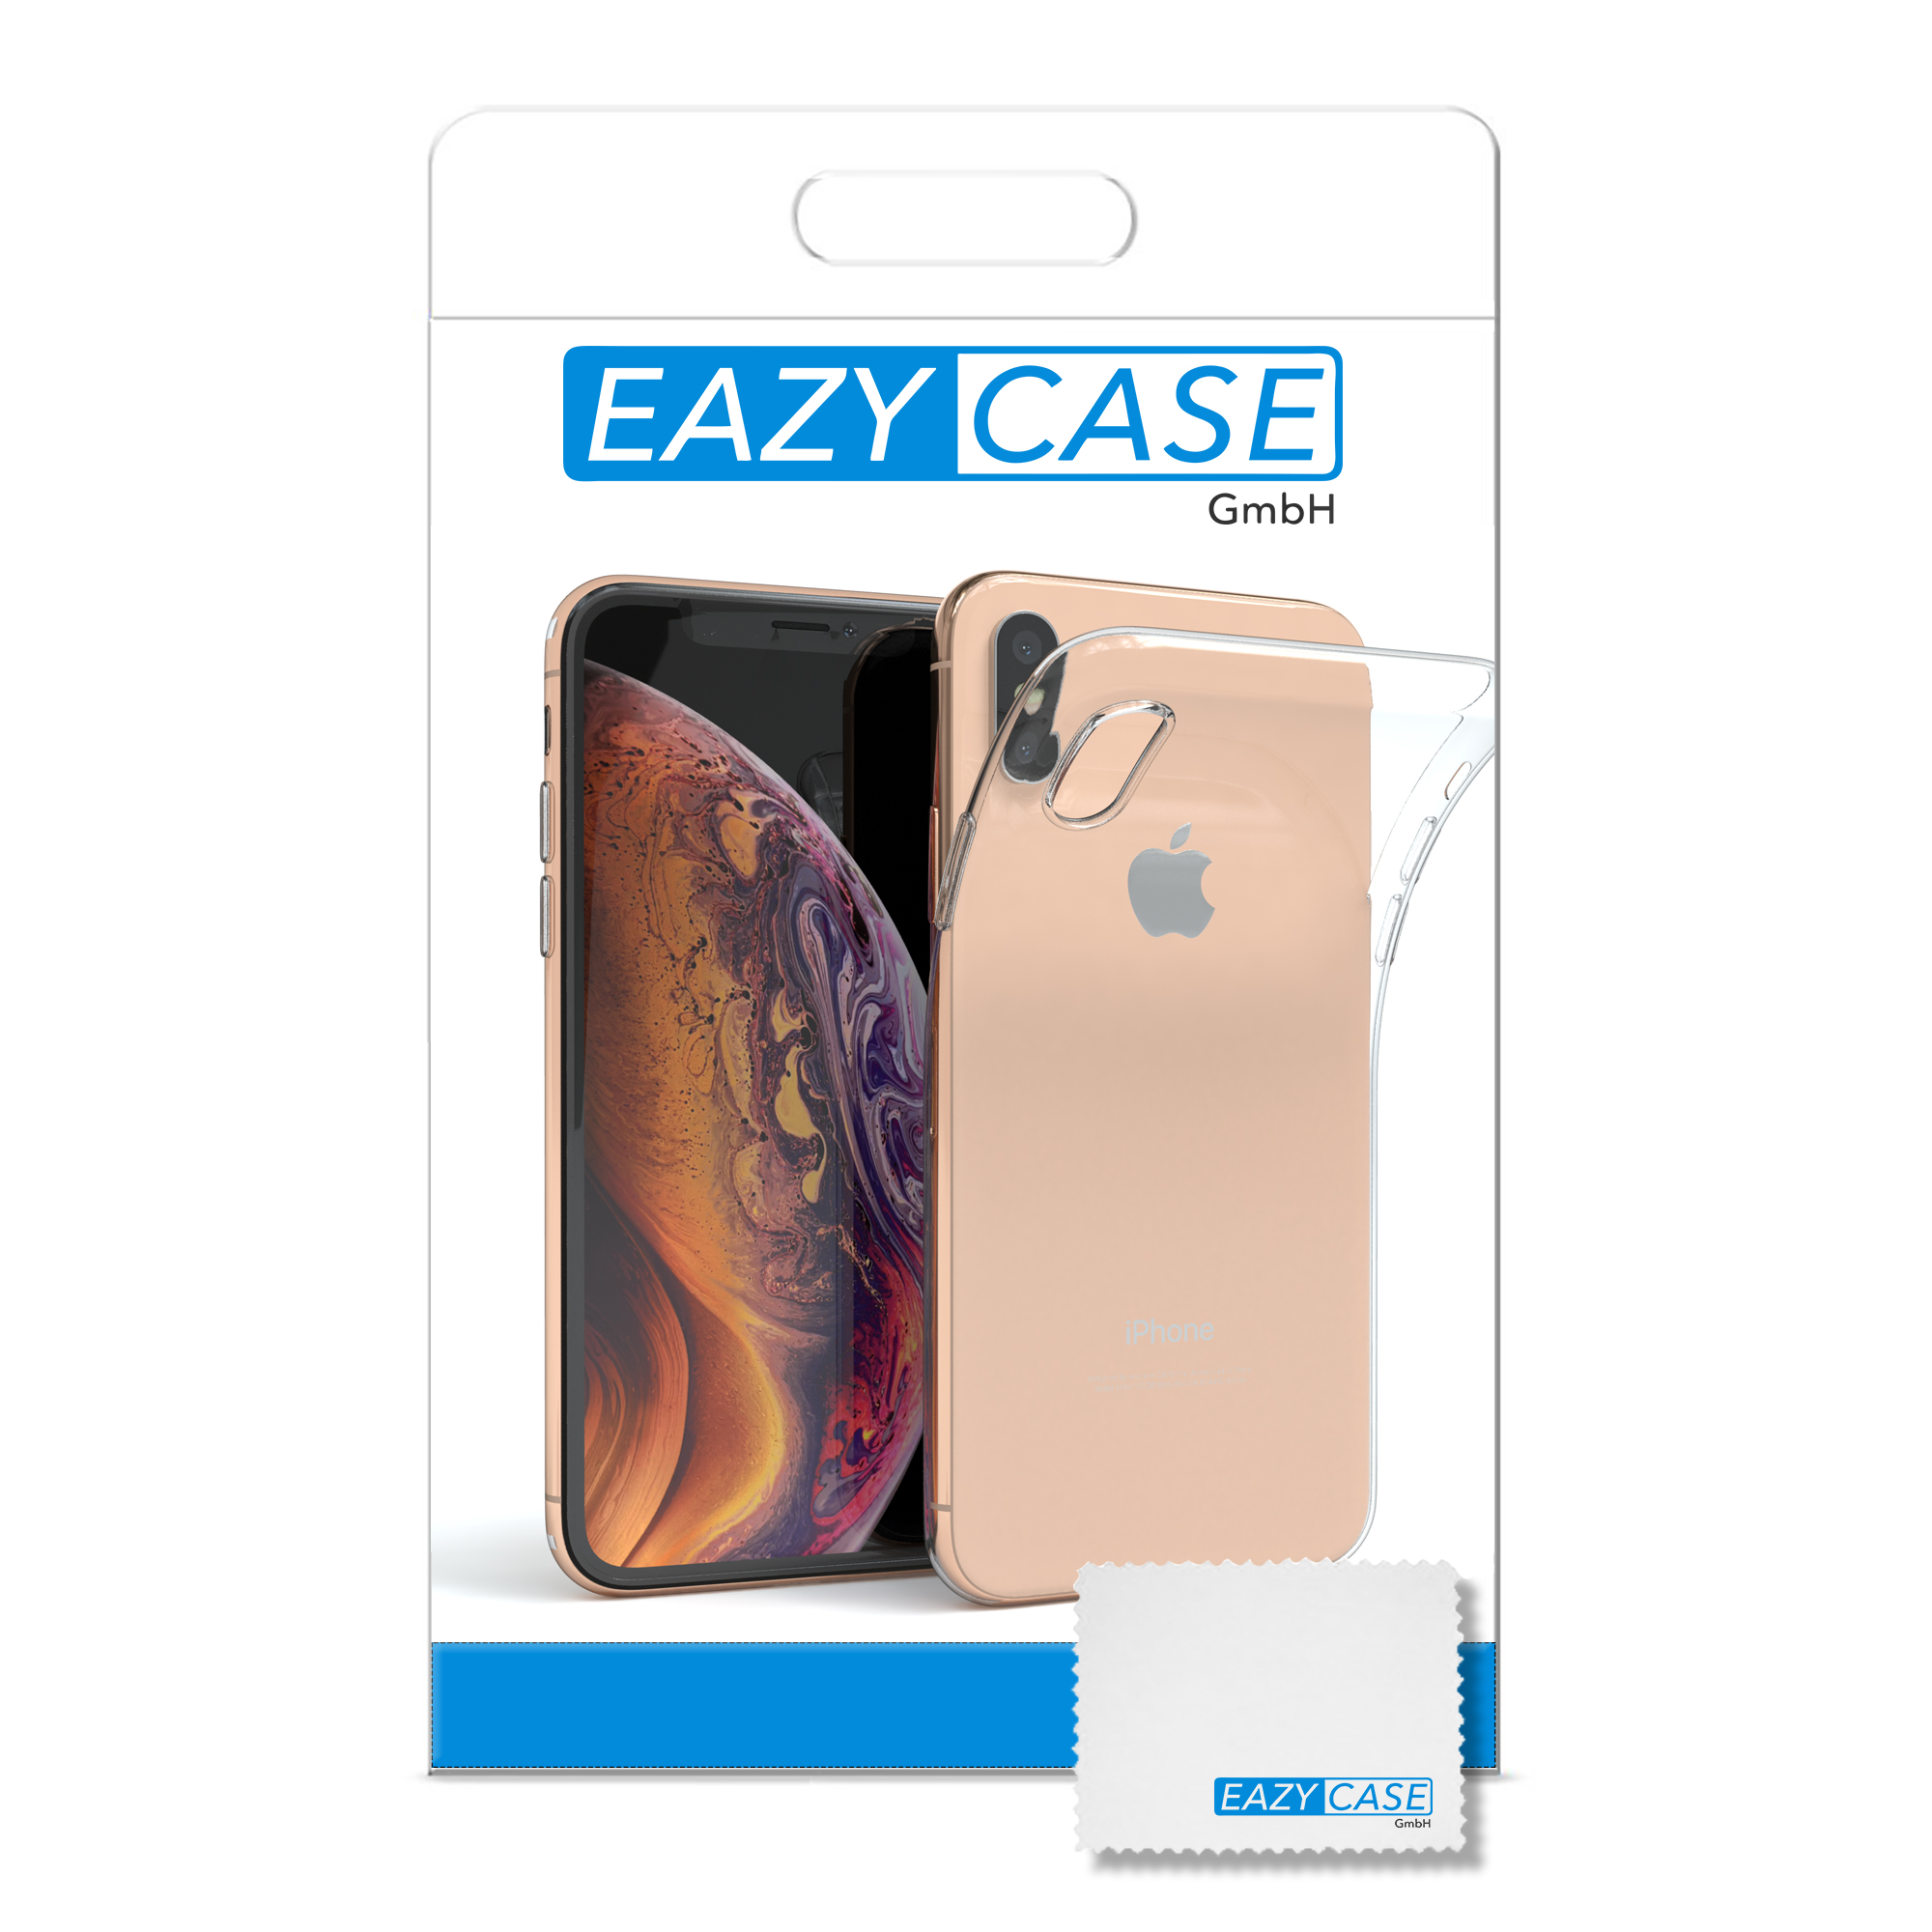 EAZY CASE Slimcover iPhone Apple, XS Clear, Max, Durchsichtig Backcover